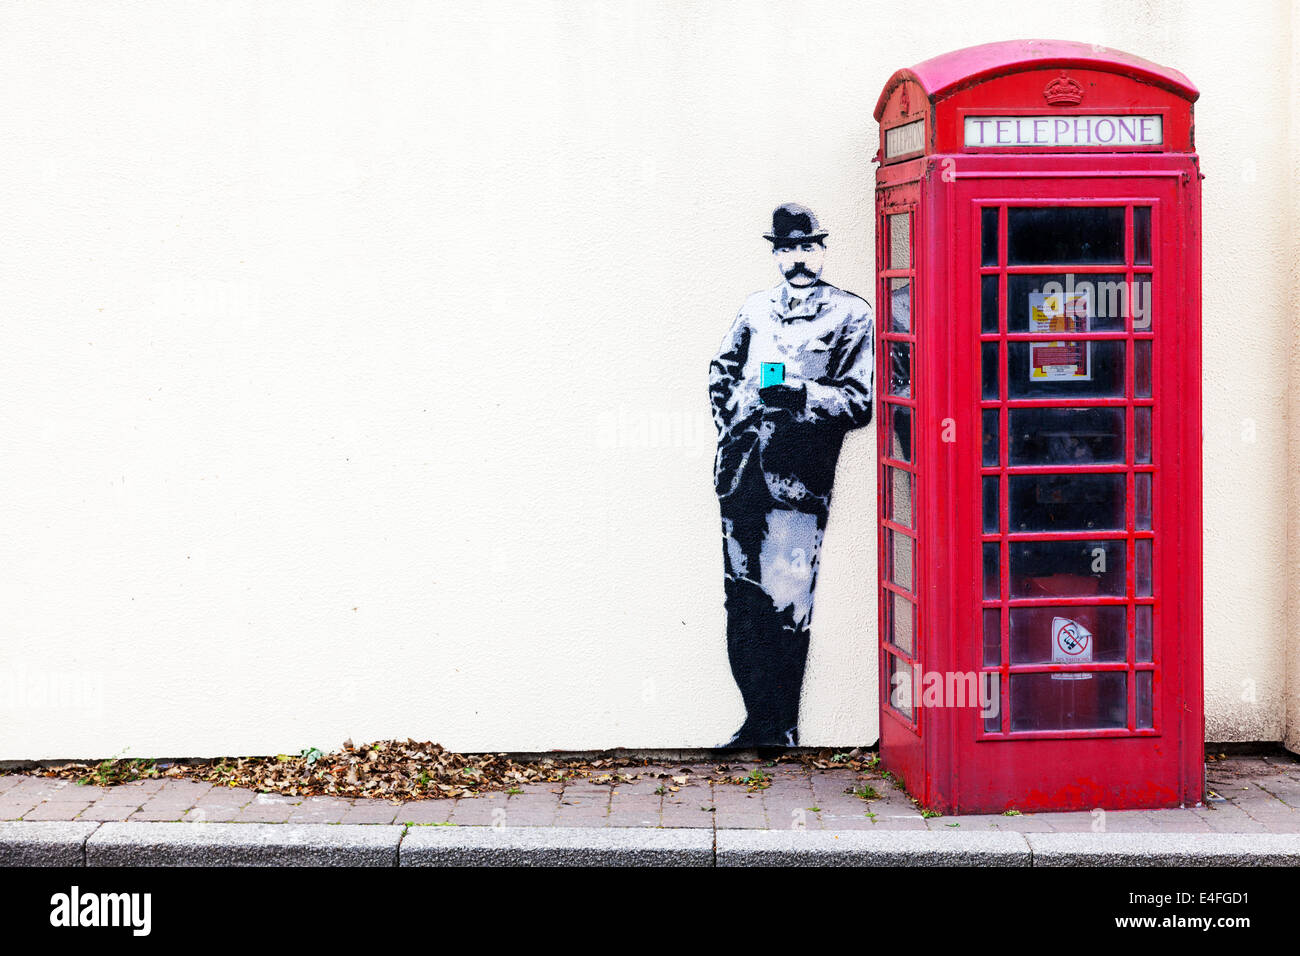 Banksy style mural graffiti red phone box in Great Malvern Worcestershire UK England Stock Photo